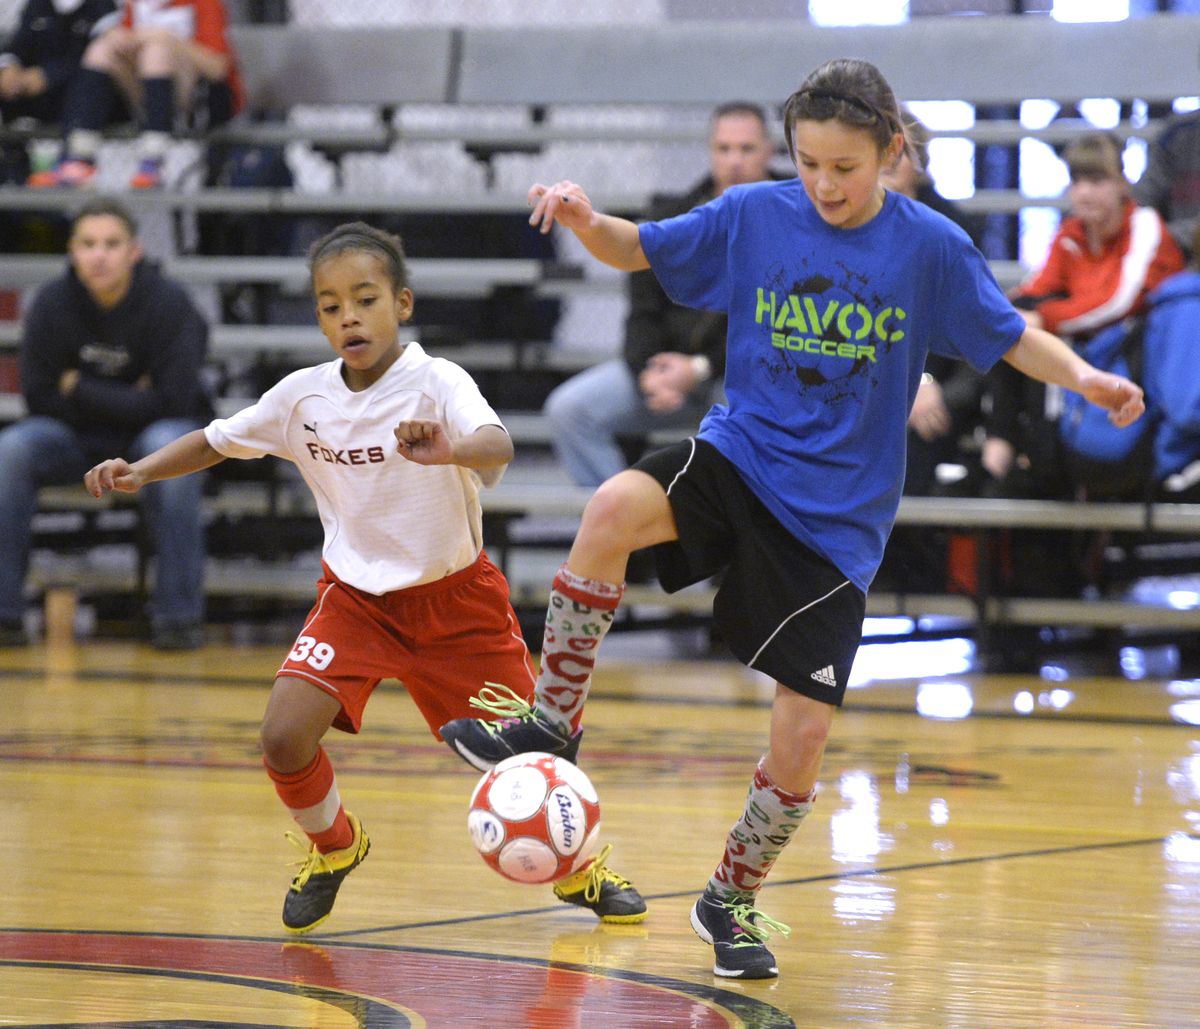 At the Snowball Shootout at the HUB sports center, Amaree Moore, left, and Jordy Newman, both 10 years old, play futsal, an indoor version of soccer, Saturday, Dec. 28, 2013.  Futsal uses a ball with less bounce. (Jesse Tinsley / The Spokesman-Review)